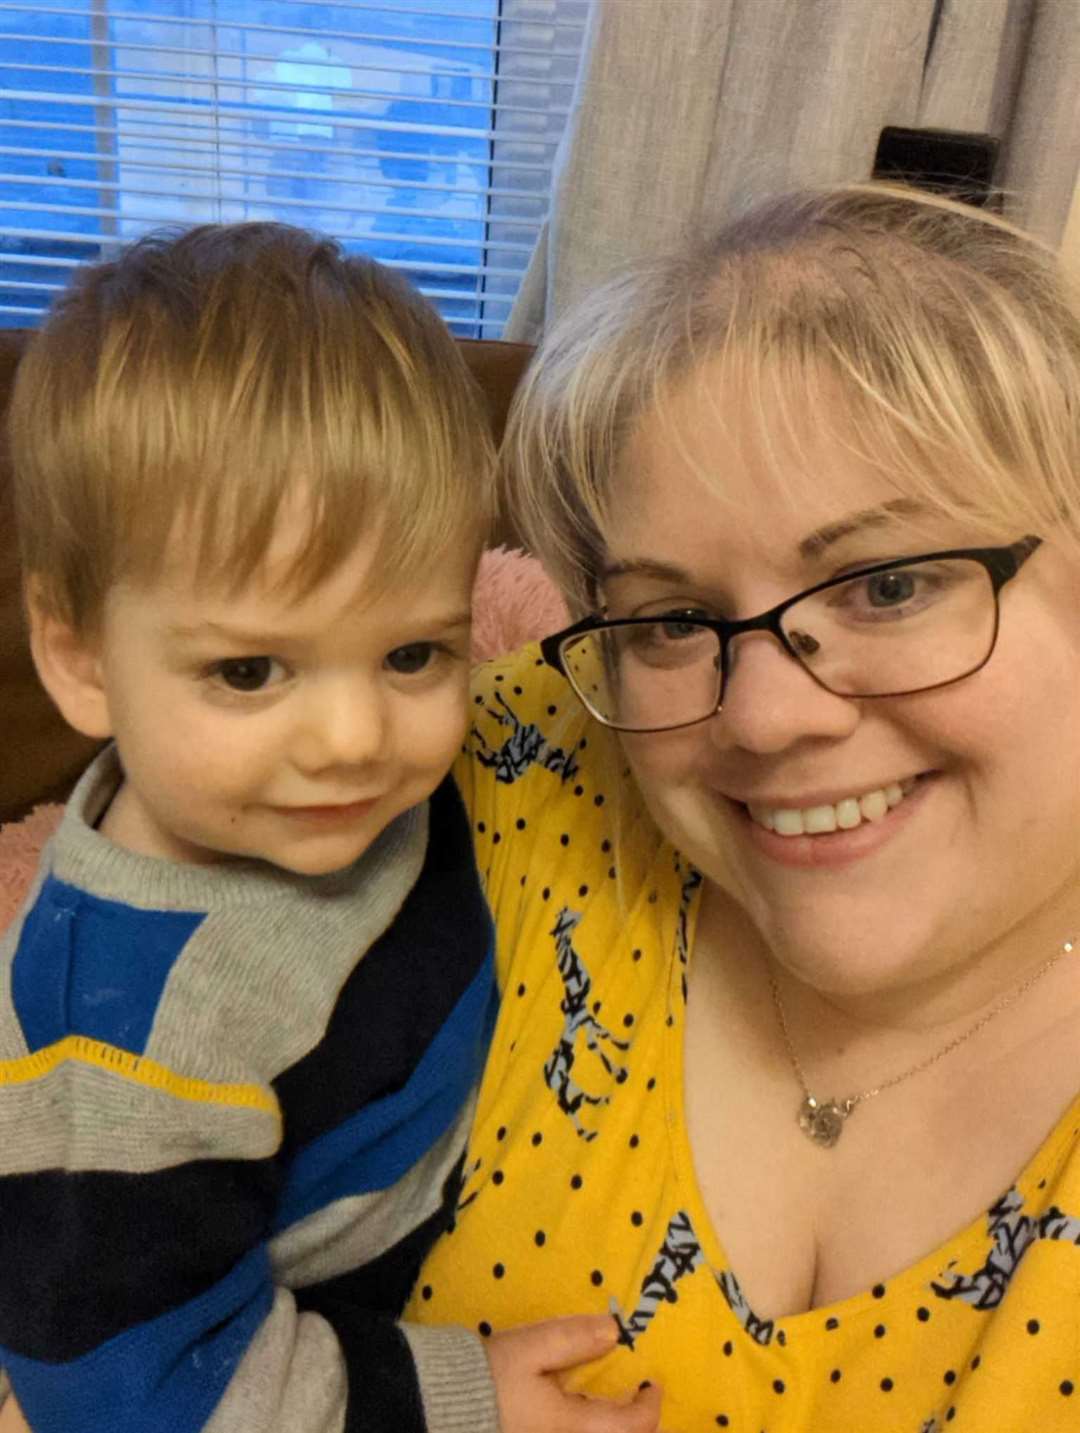 Sarah Hedges and her son Thomas today